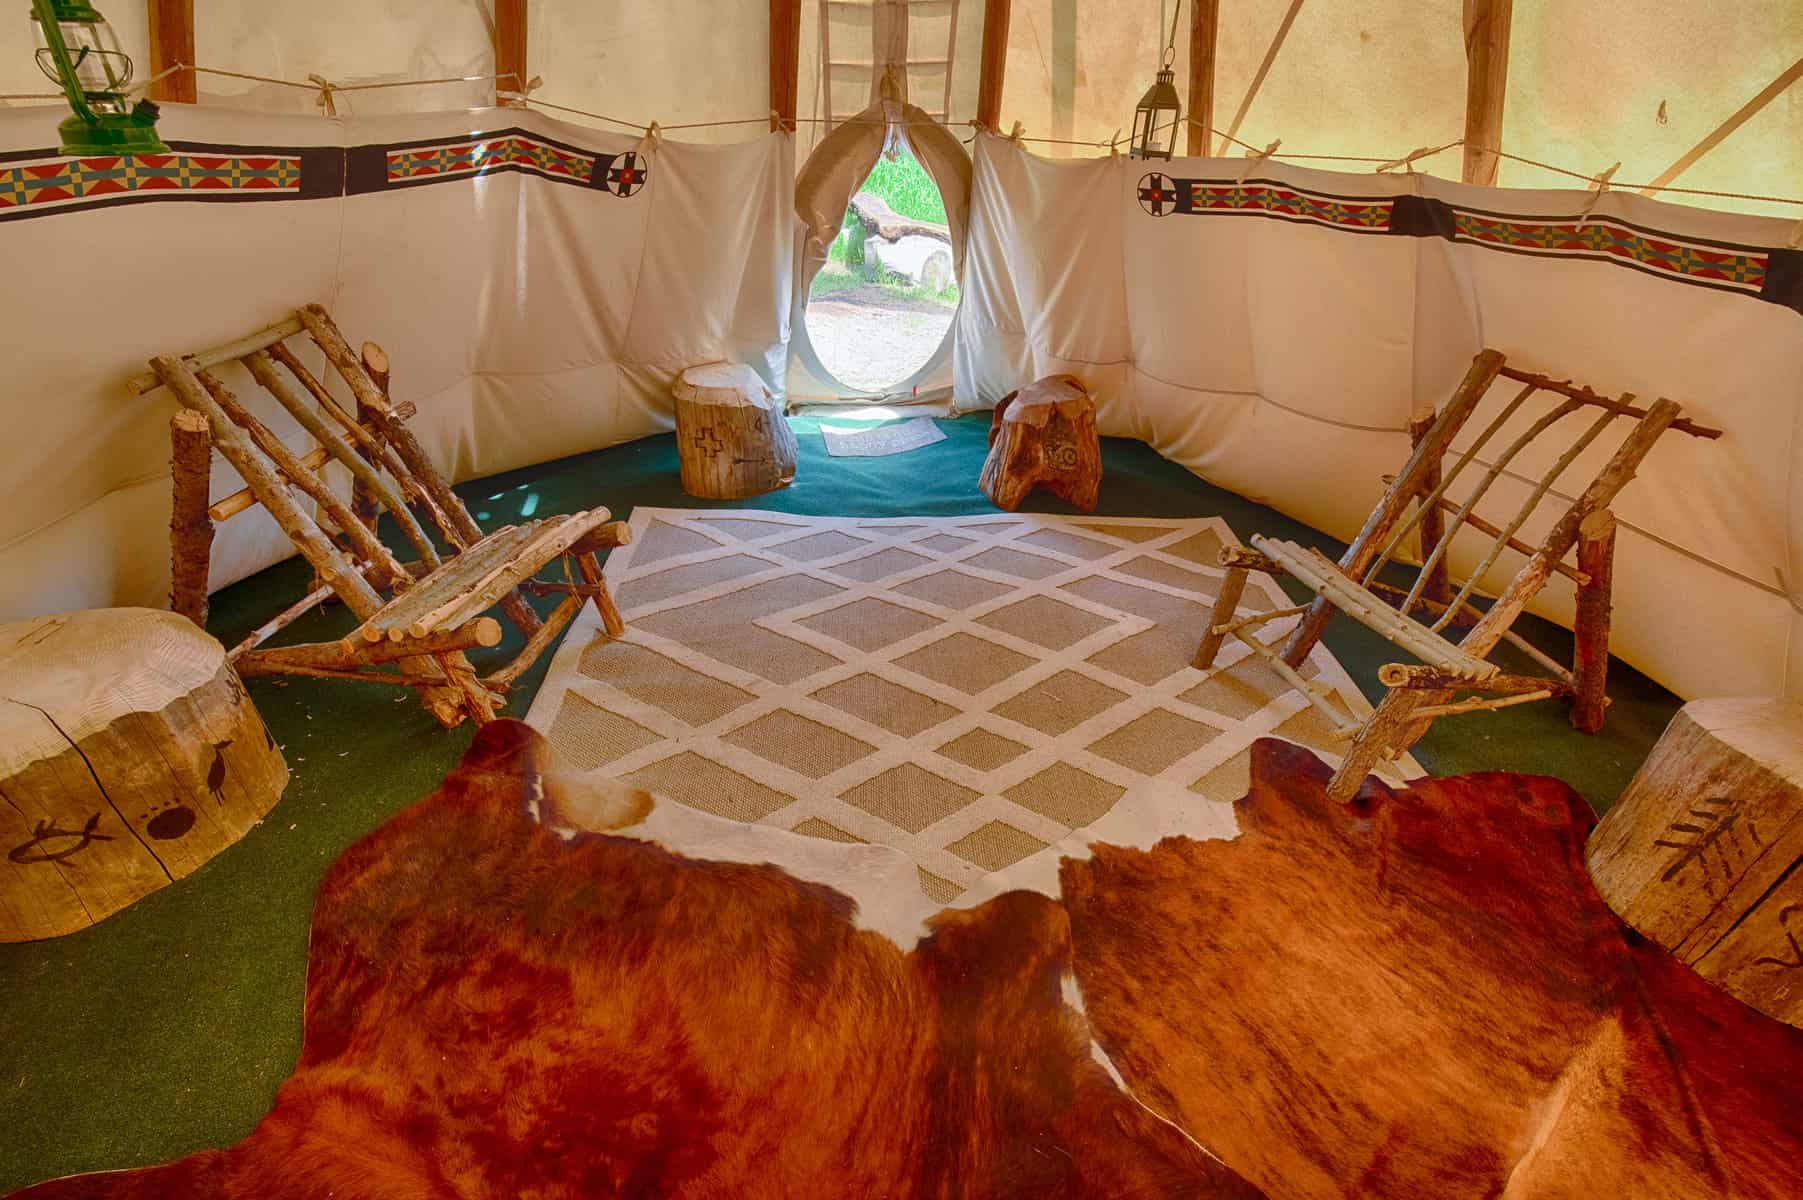 Teepee camping interior with carpet, rug, cowhides, log furniture and Indian artifacts.